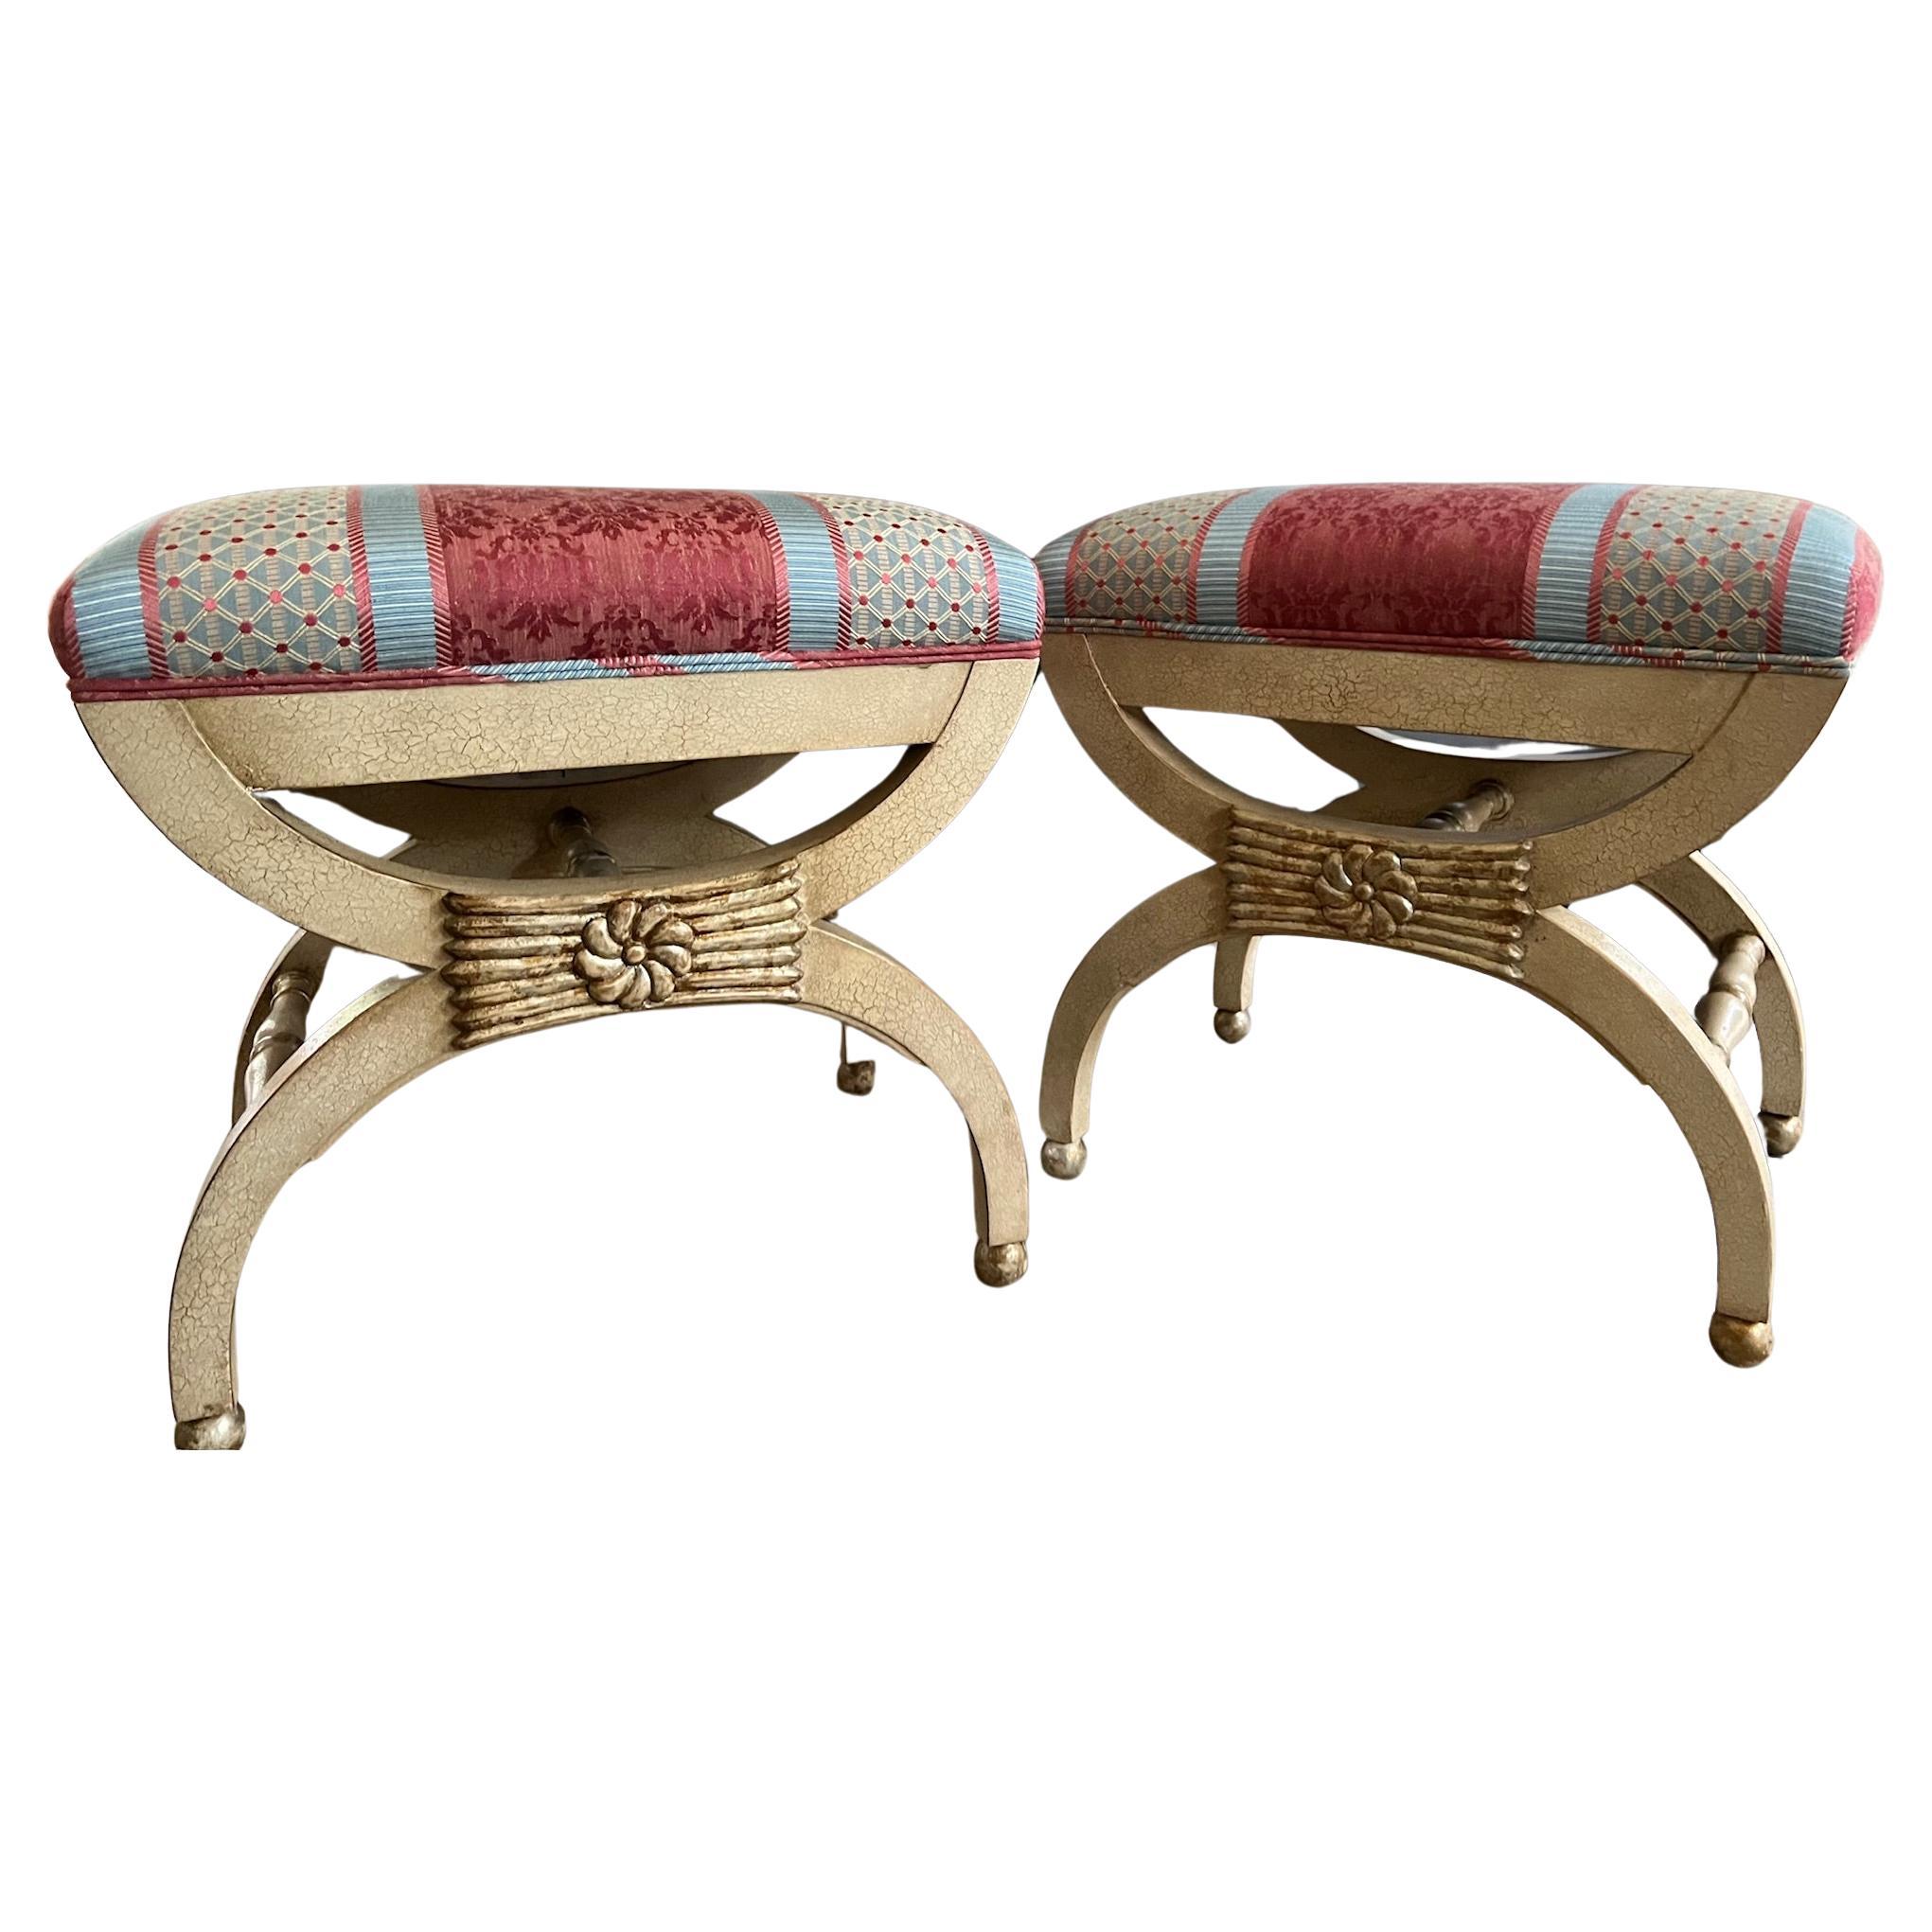 Gilt Painted Neoclassical Style Stools by William Switzer- Set of 2 For Sale